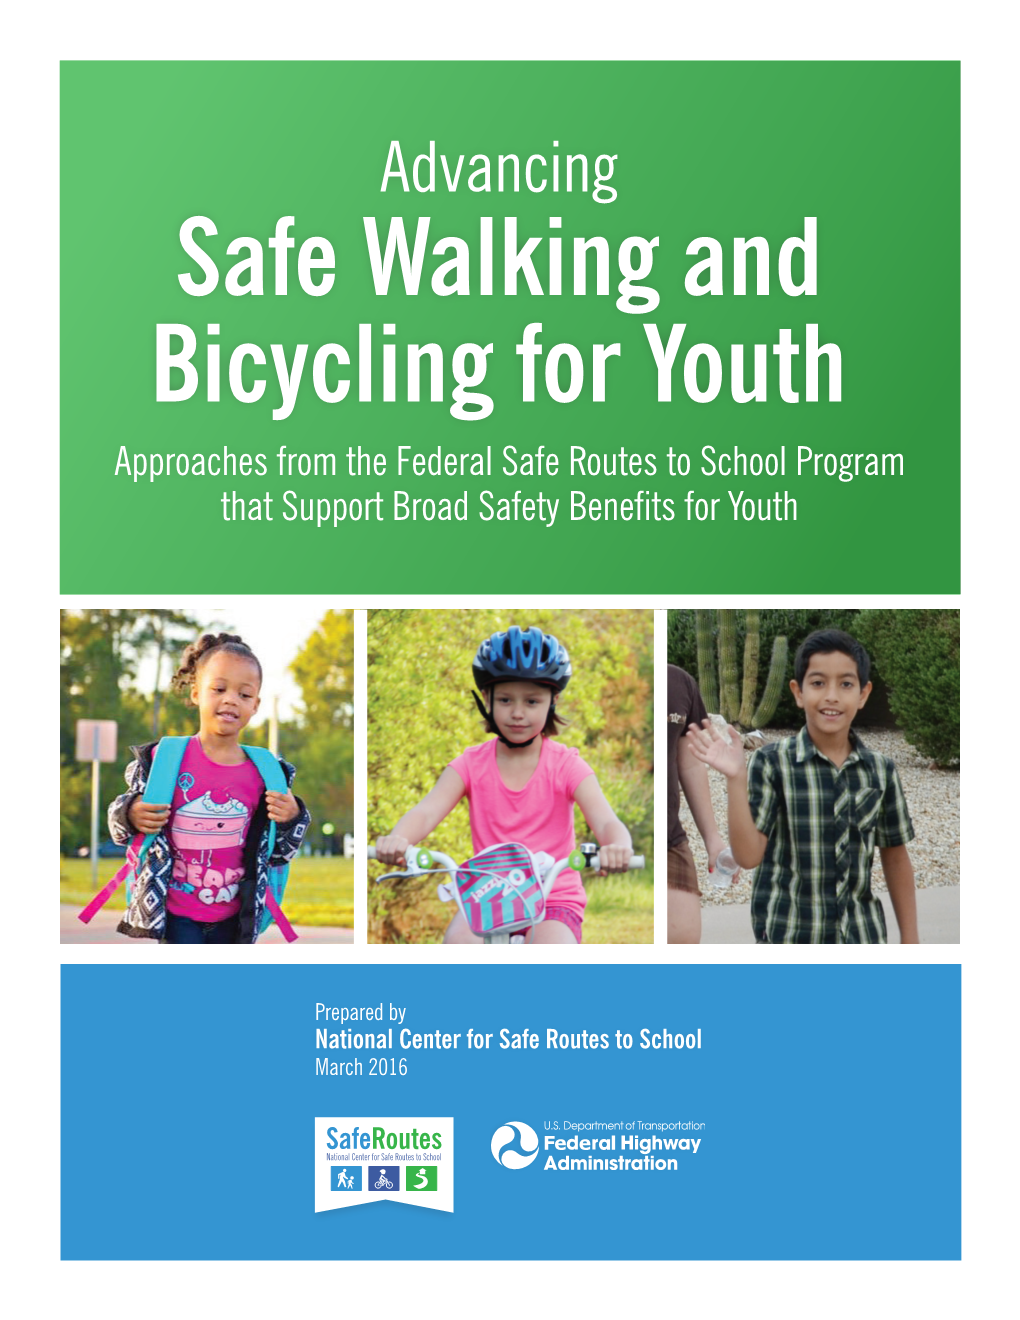 Safe Walking and Bicycling for Youth Approaches from the Federal Safe Routes to School Program That Support Broad Safety Benefits for Youth